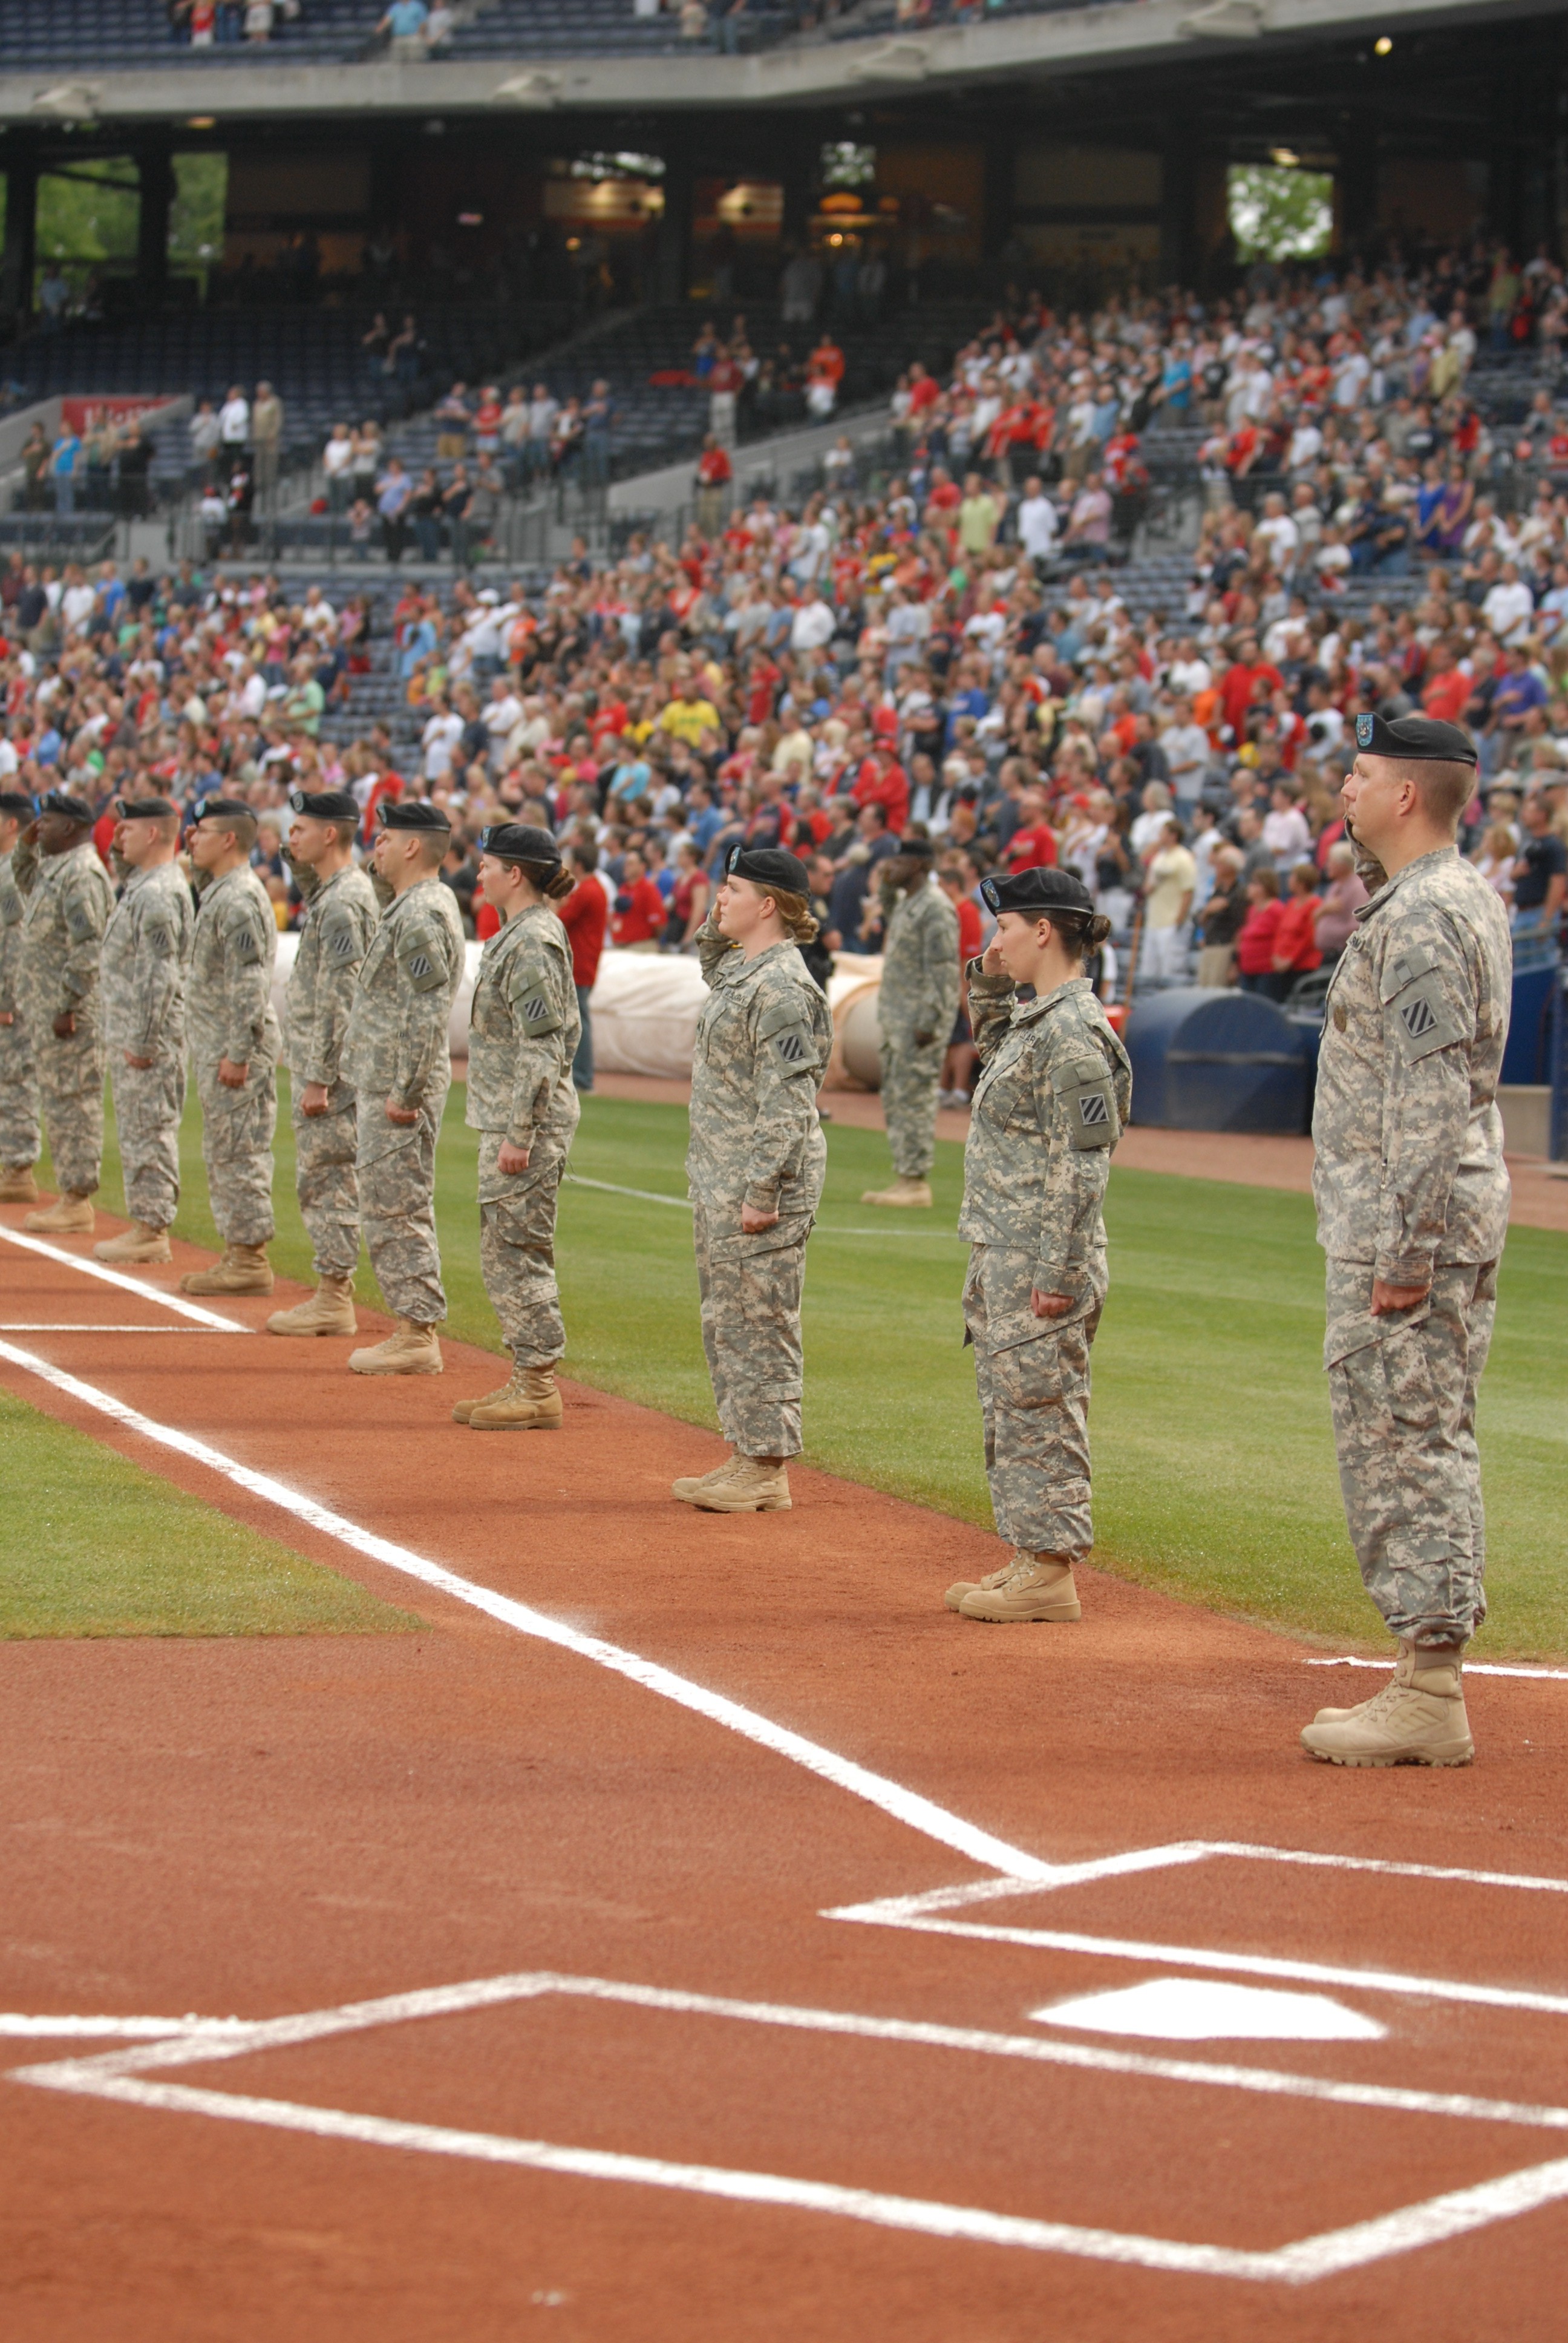 Atlanta Braves on X: The Braves are honoring our Military by